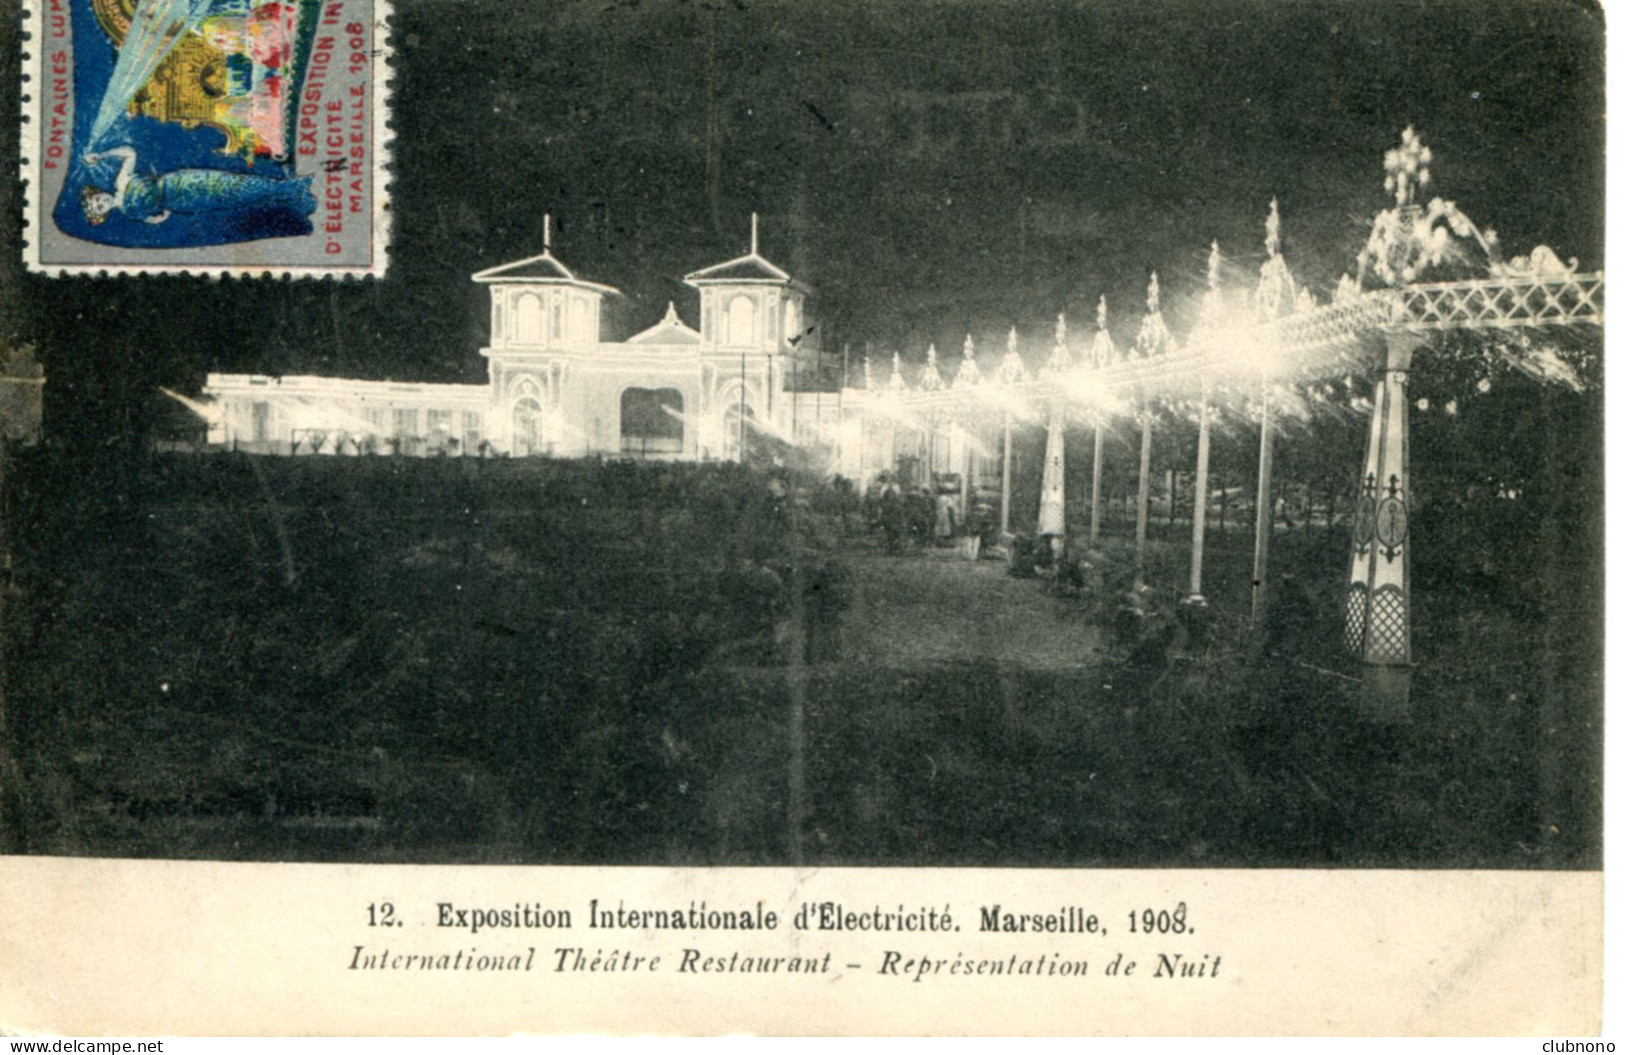 CPA - MARSEILLE - EXPO INT. D'ELECTRICITE 1908 - INTERNATIONAL THEATRE RESTAURANT DE NUIT - Electrical Trade Shows And Other